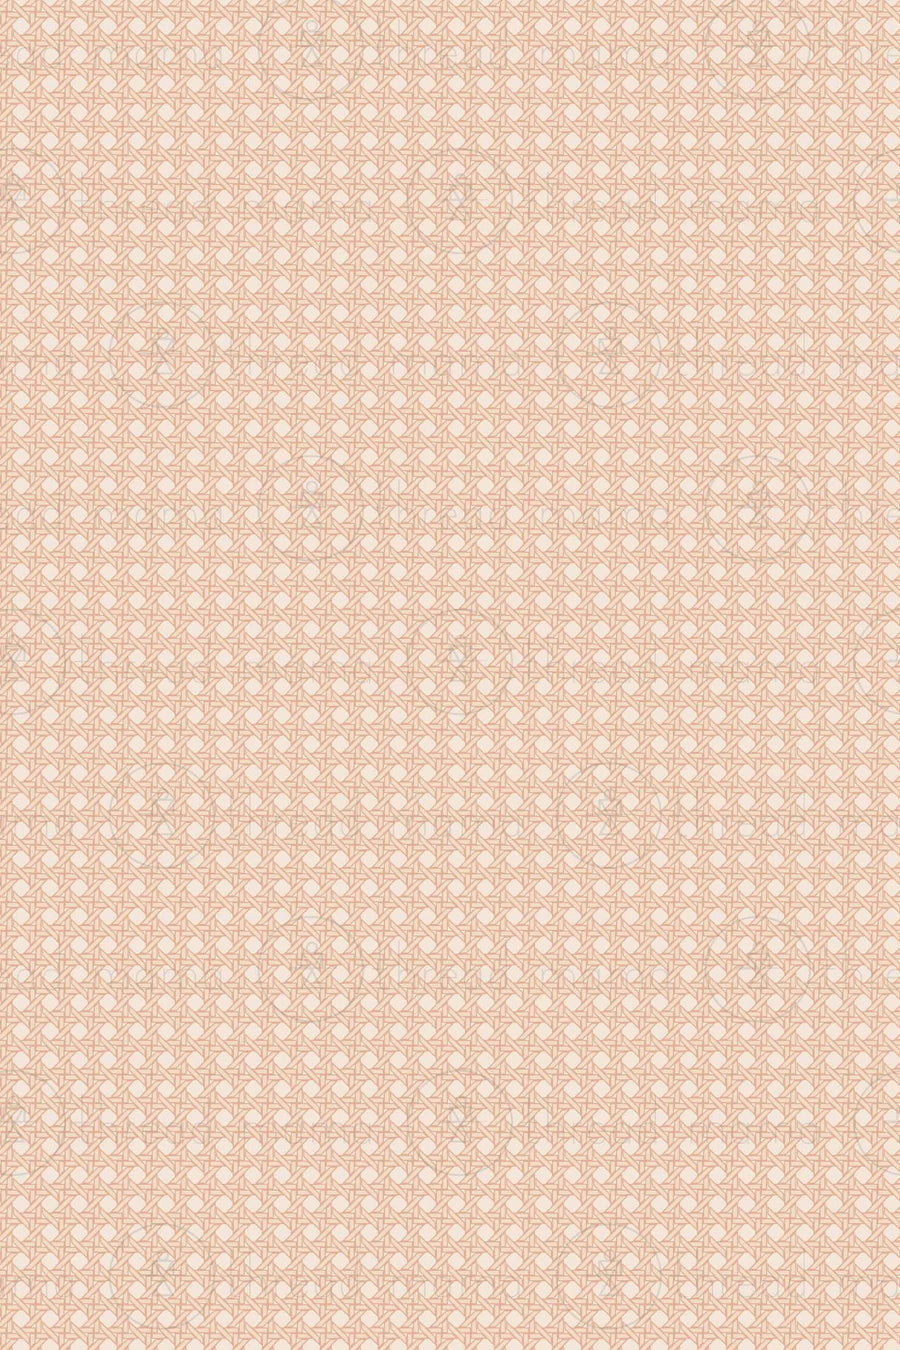 Repeating Pattern 110 (Seamless)